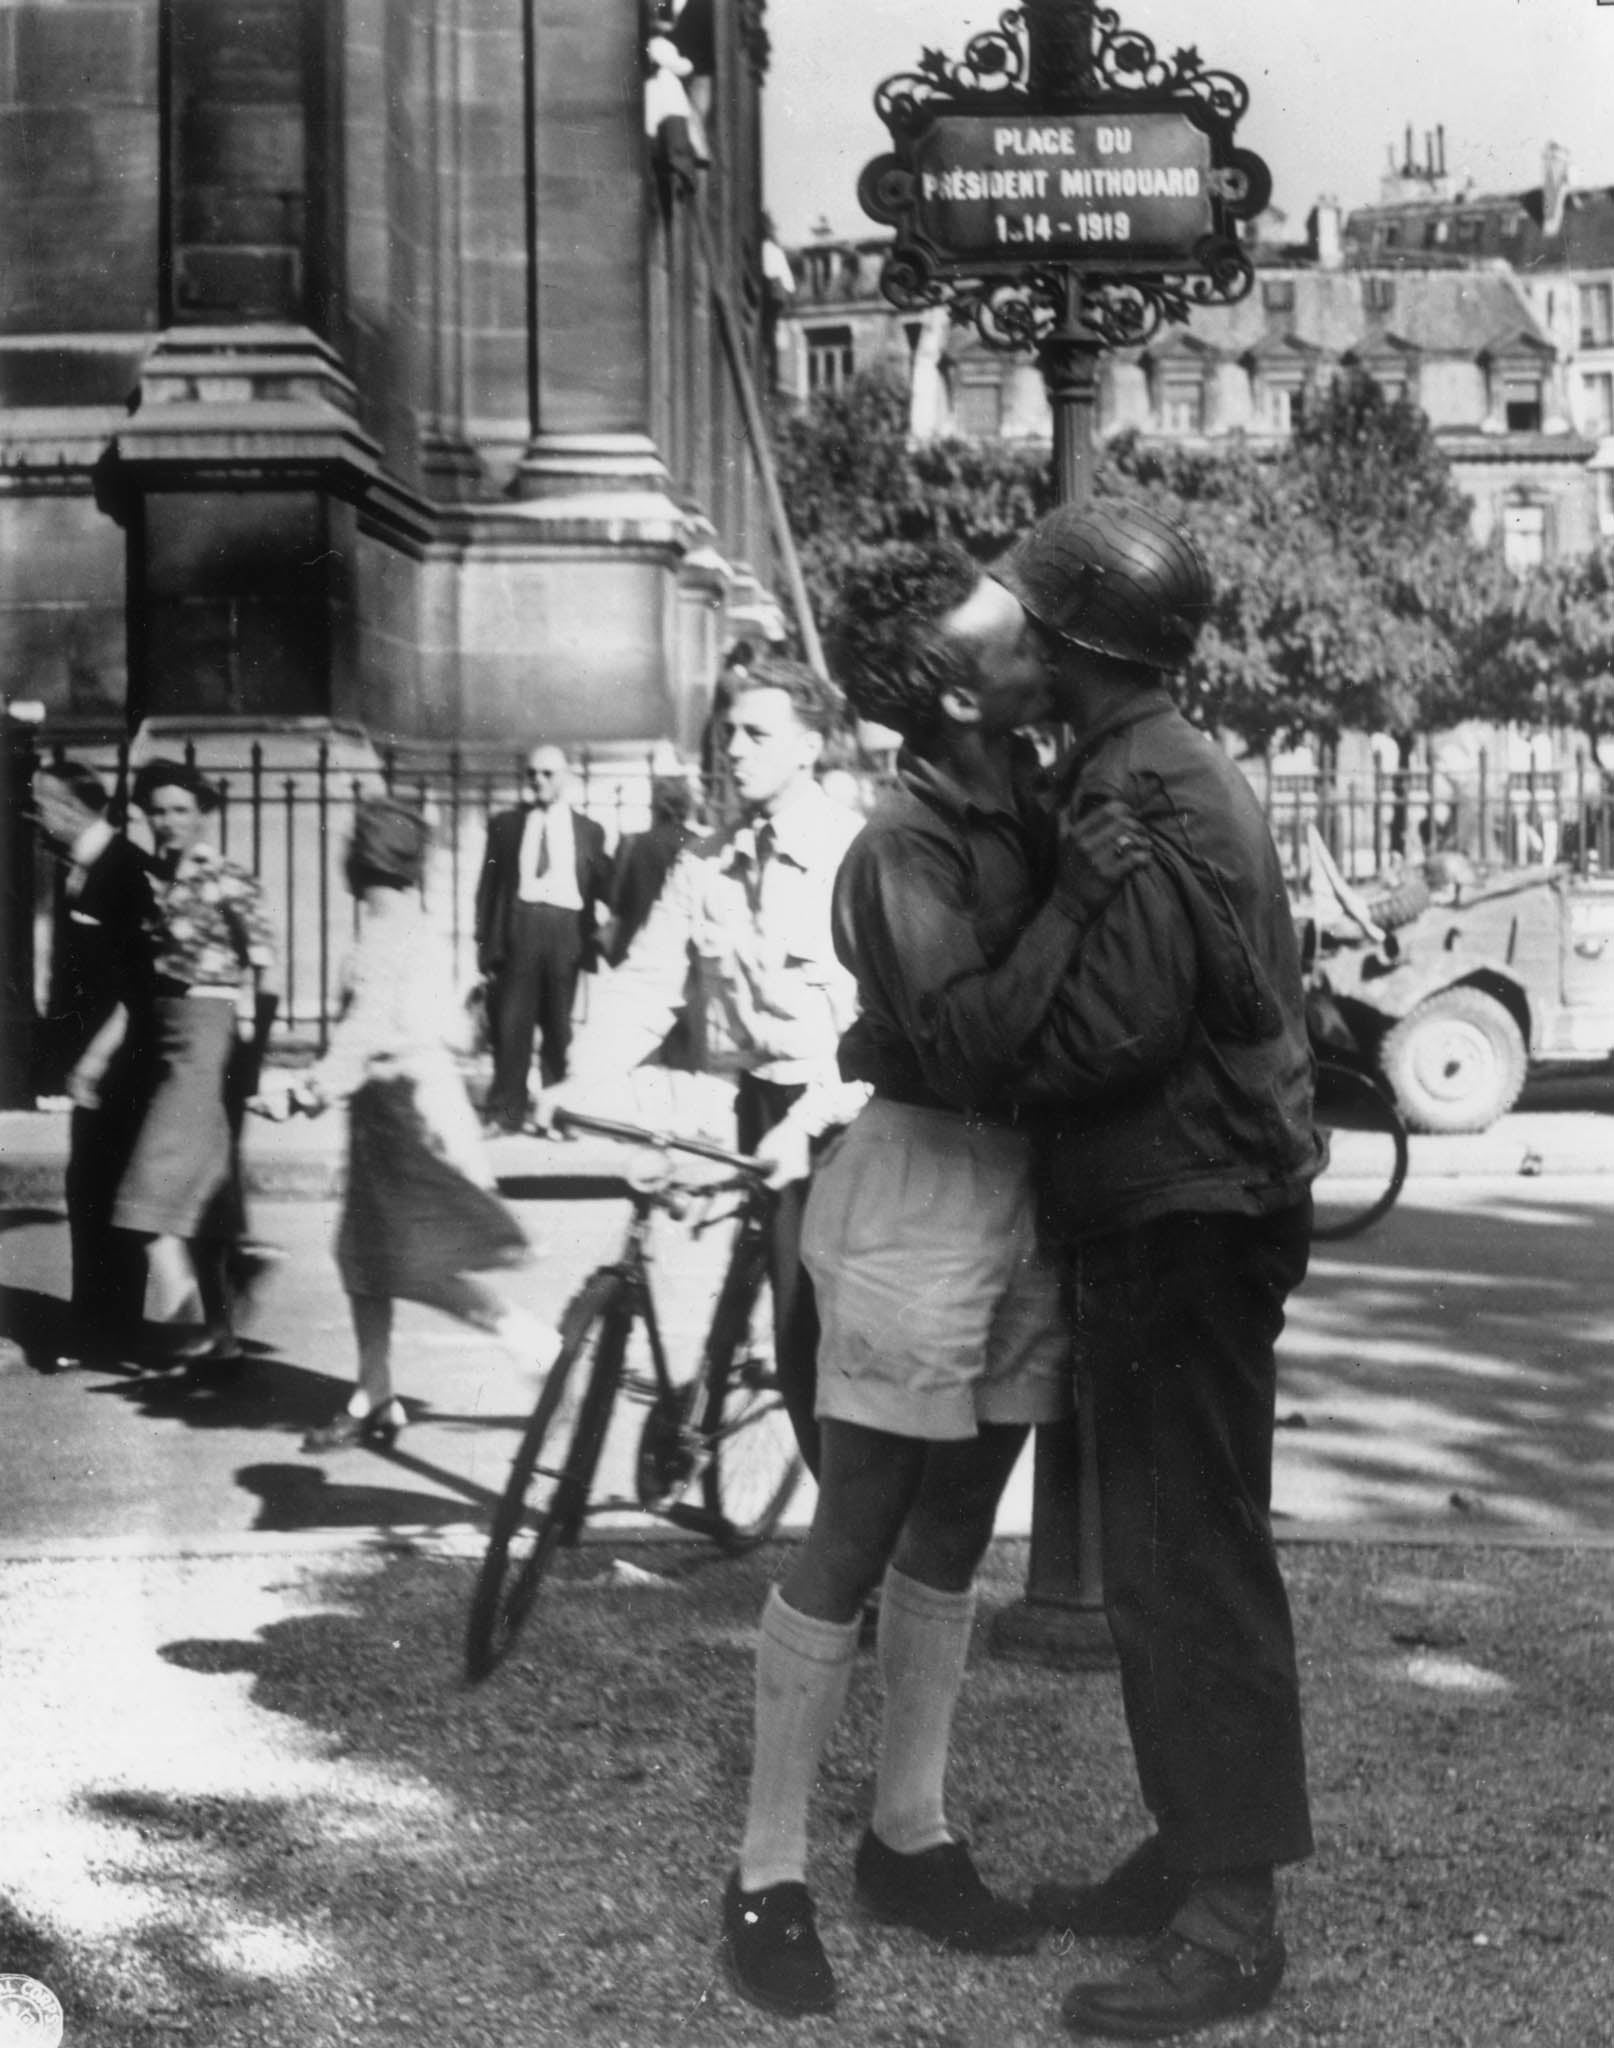 1944: A civilian and a member of the French underground guerrilla band the Marquis exchange a greeting in the street after the Liberation of Paris.